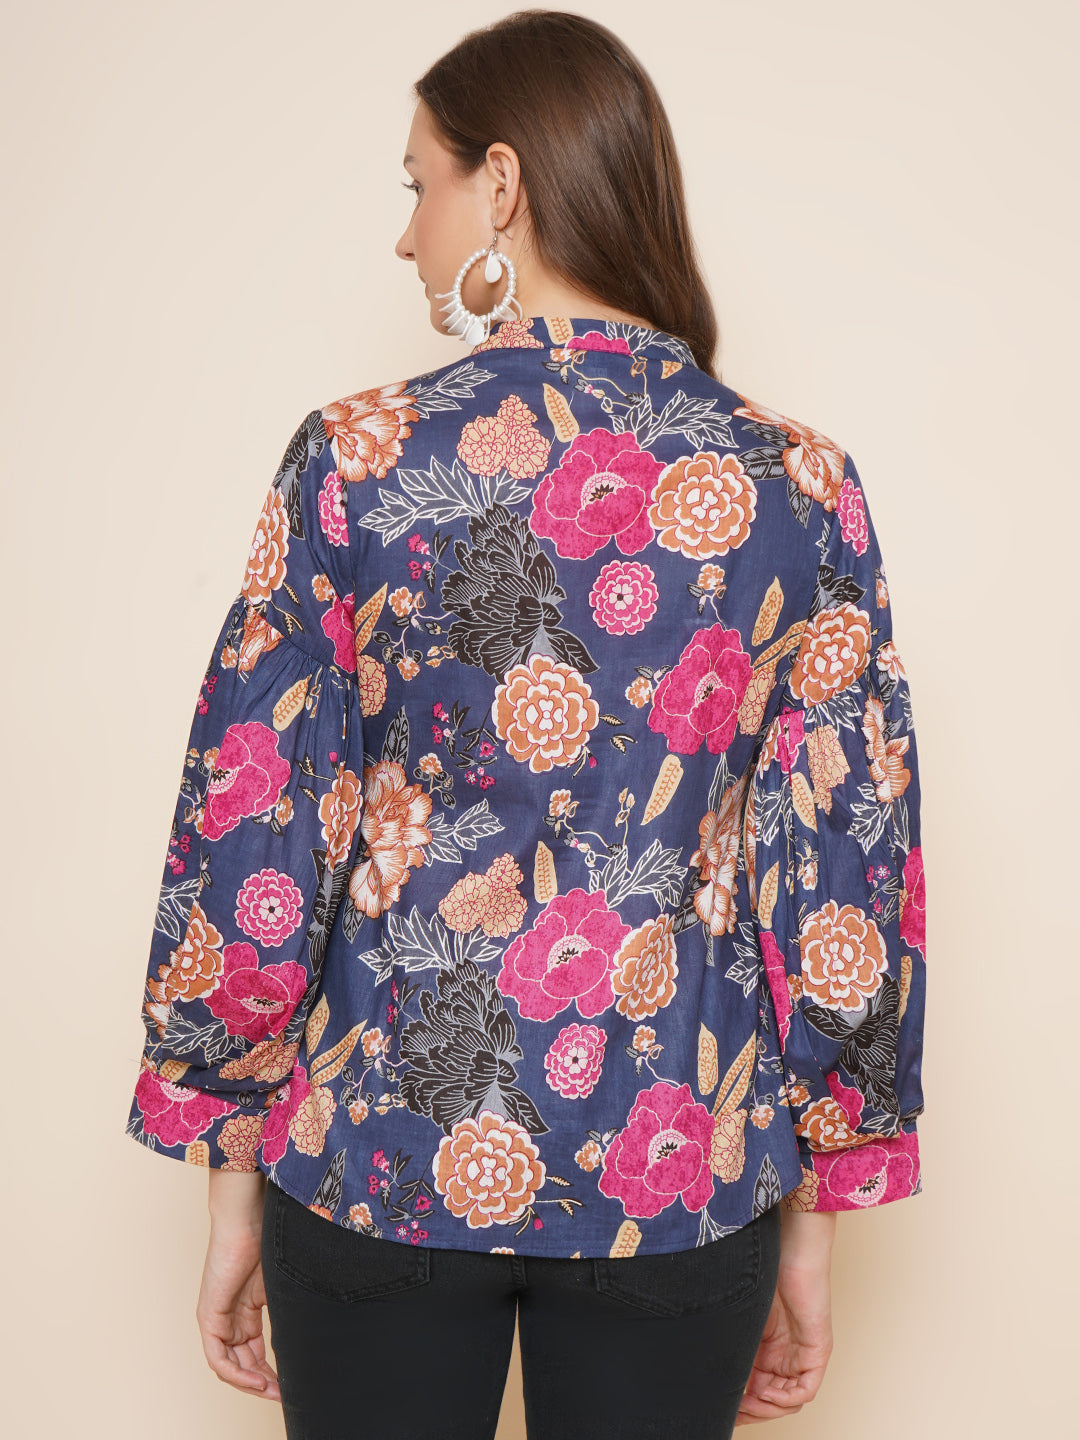 Bhama Couture Blue Floral Printed Shirt Style Top